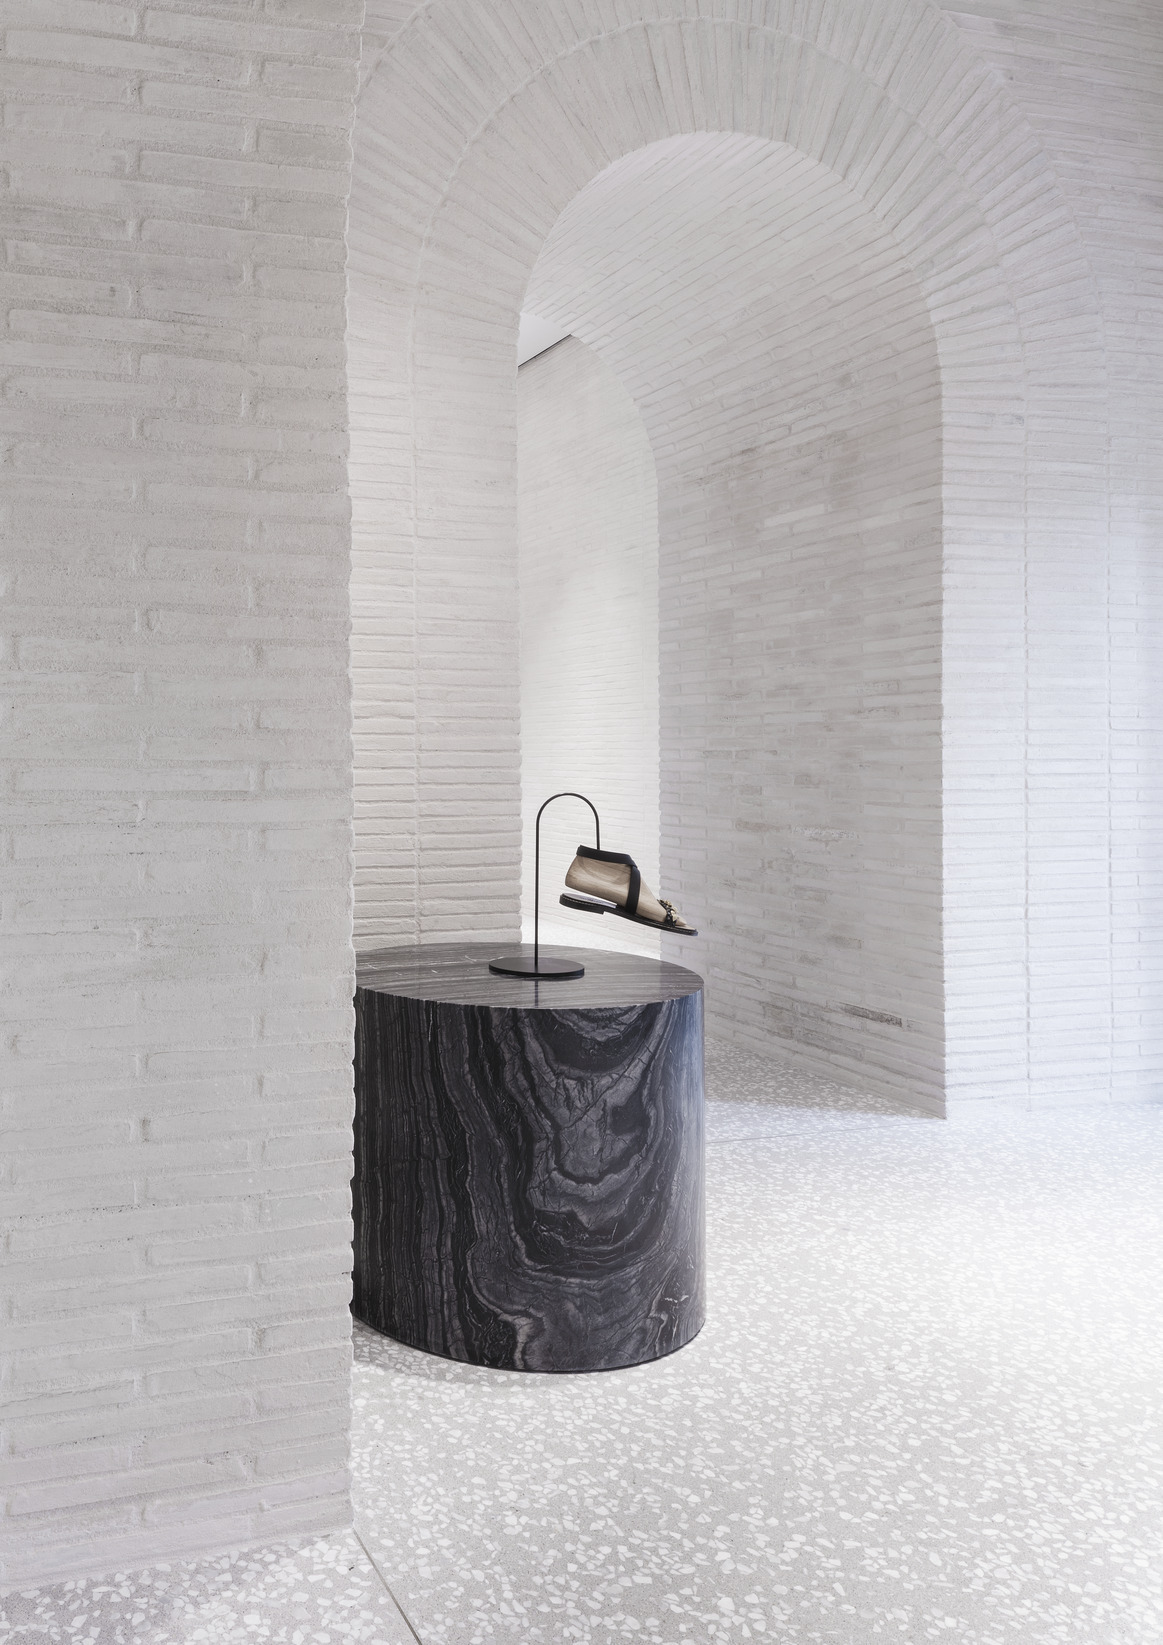 Valentino Flagship Store in Rome develops between Piazza di Spagna and Piazza Mignanelli. The first floor contains light, non-structural arches in polished white plaster to enhance the products.